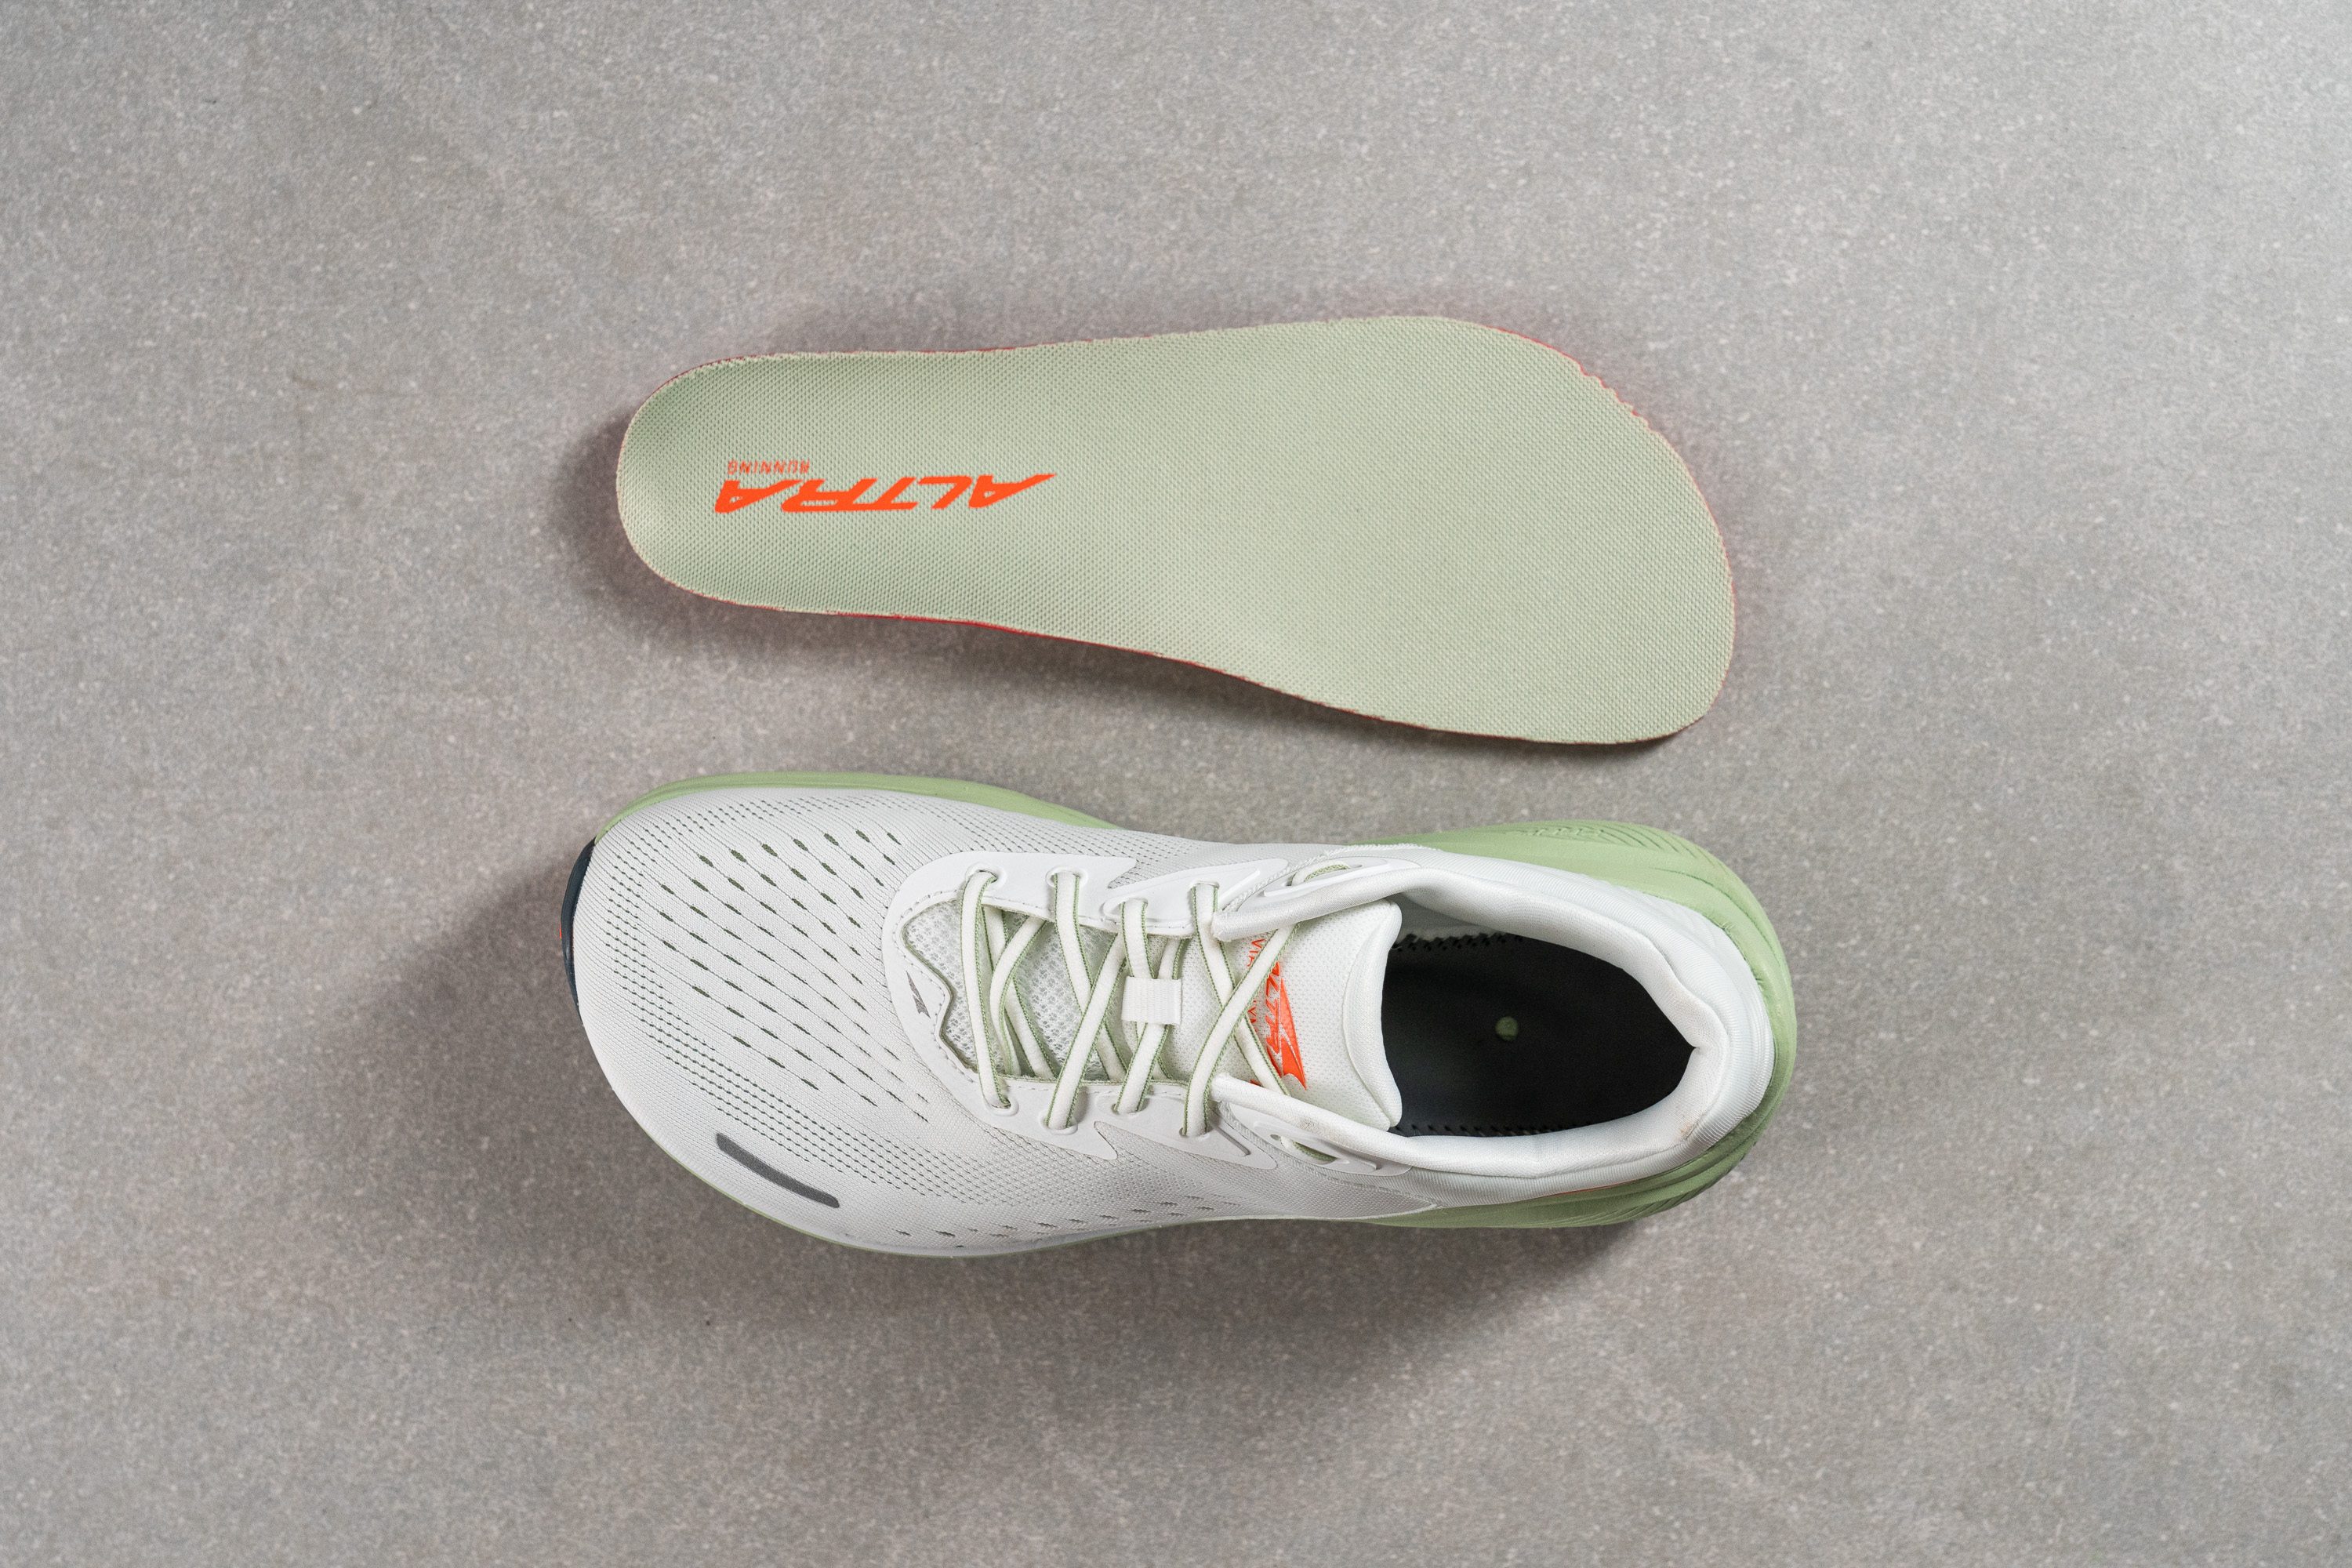 Lateral stability test Removable insole